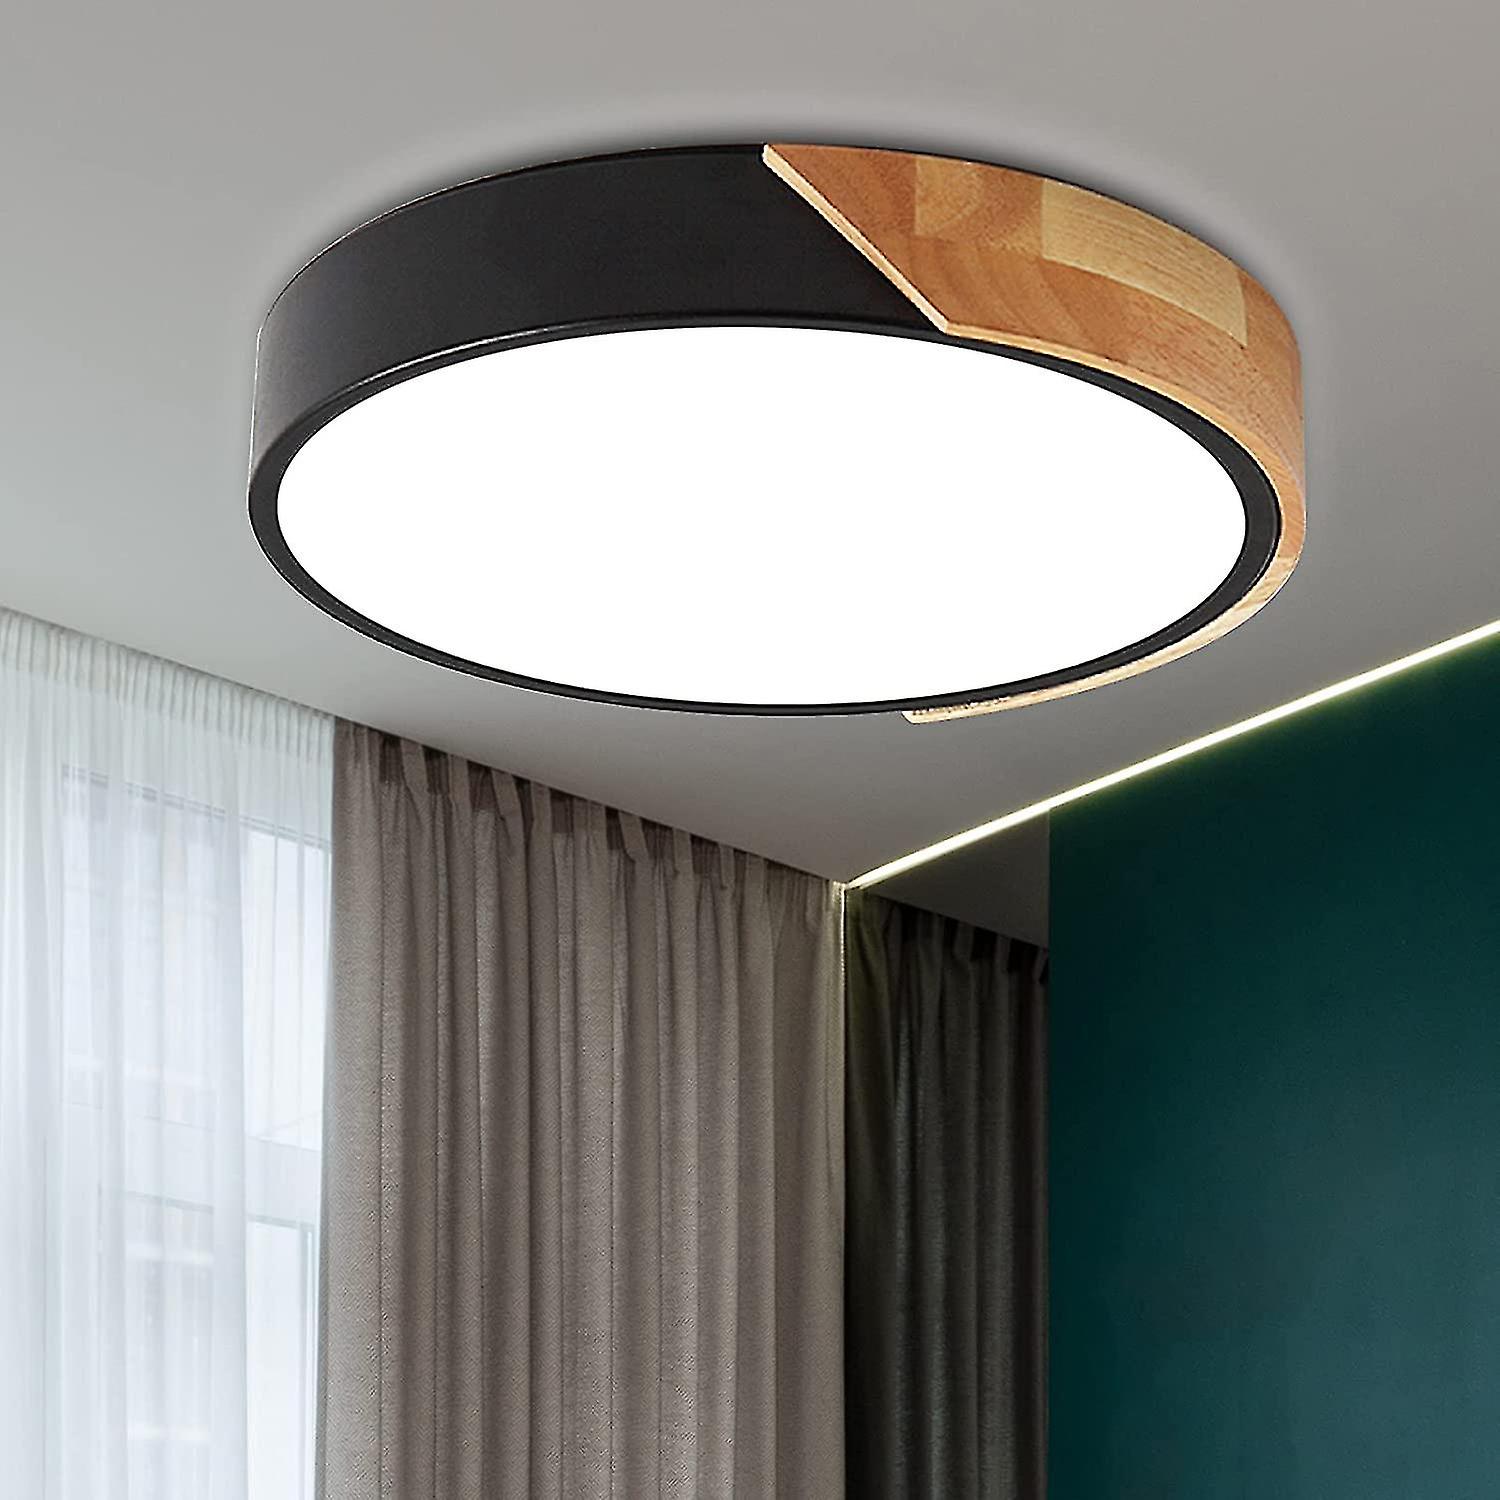 how to install a ceiling light without  existing wiring